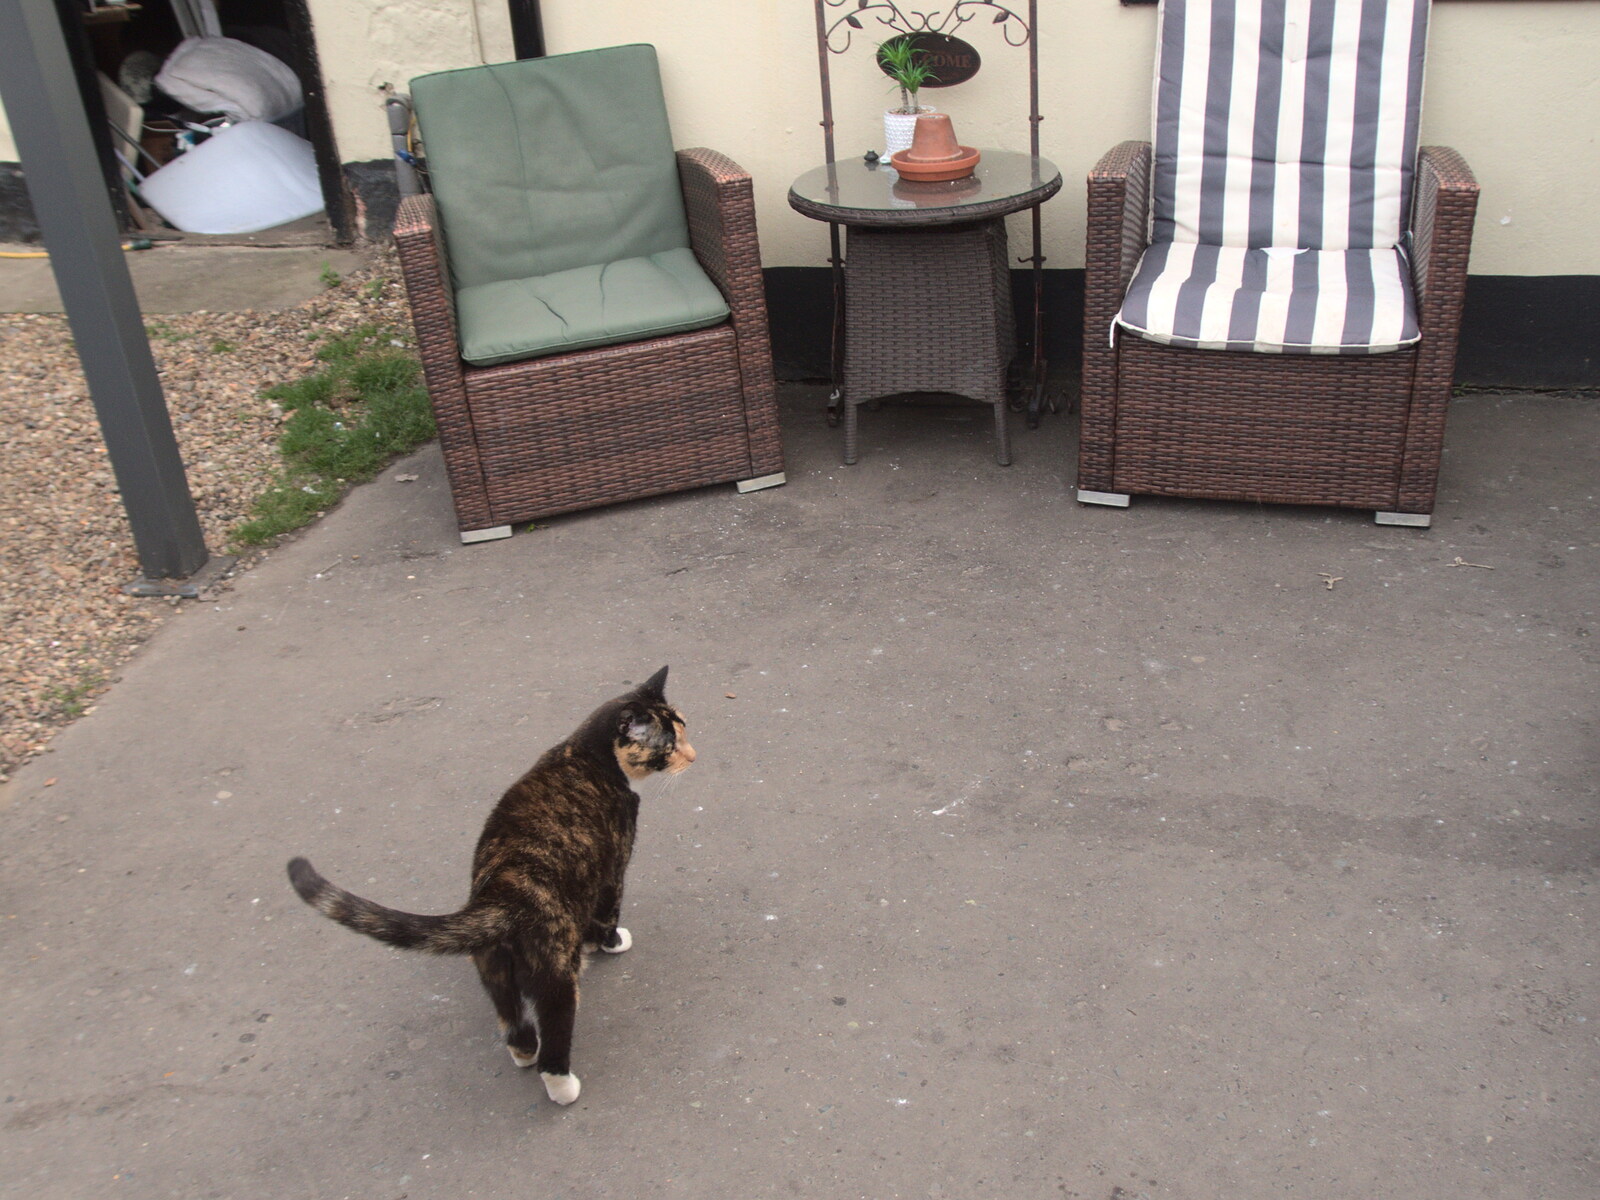 A tortoiseshell cat roams around from The BSCC at The Crown, Dickleburgh, Norfolk - 19th August 2021